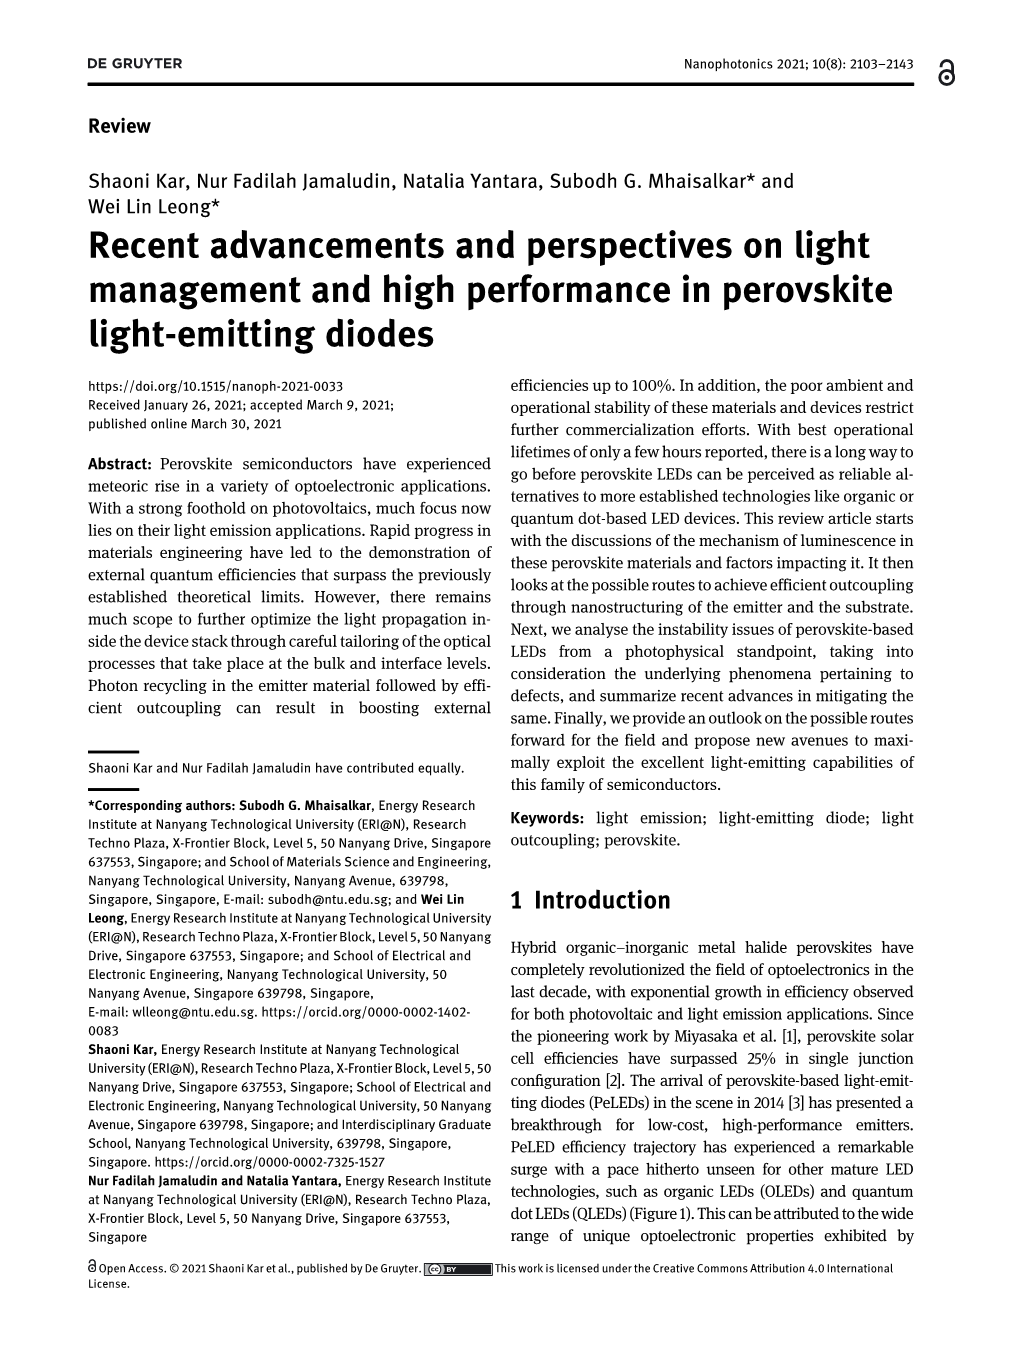 Recent Advancements and Perspectives on Light Management